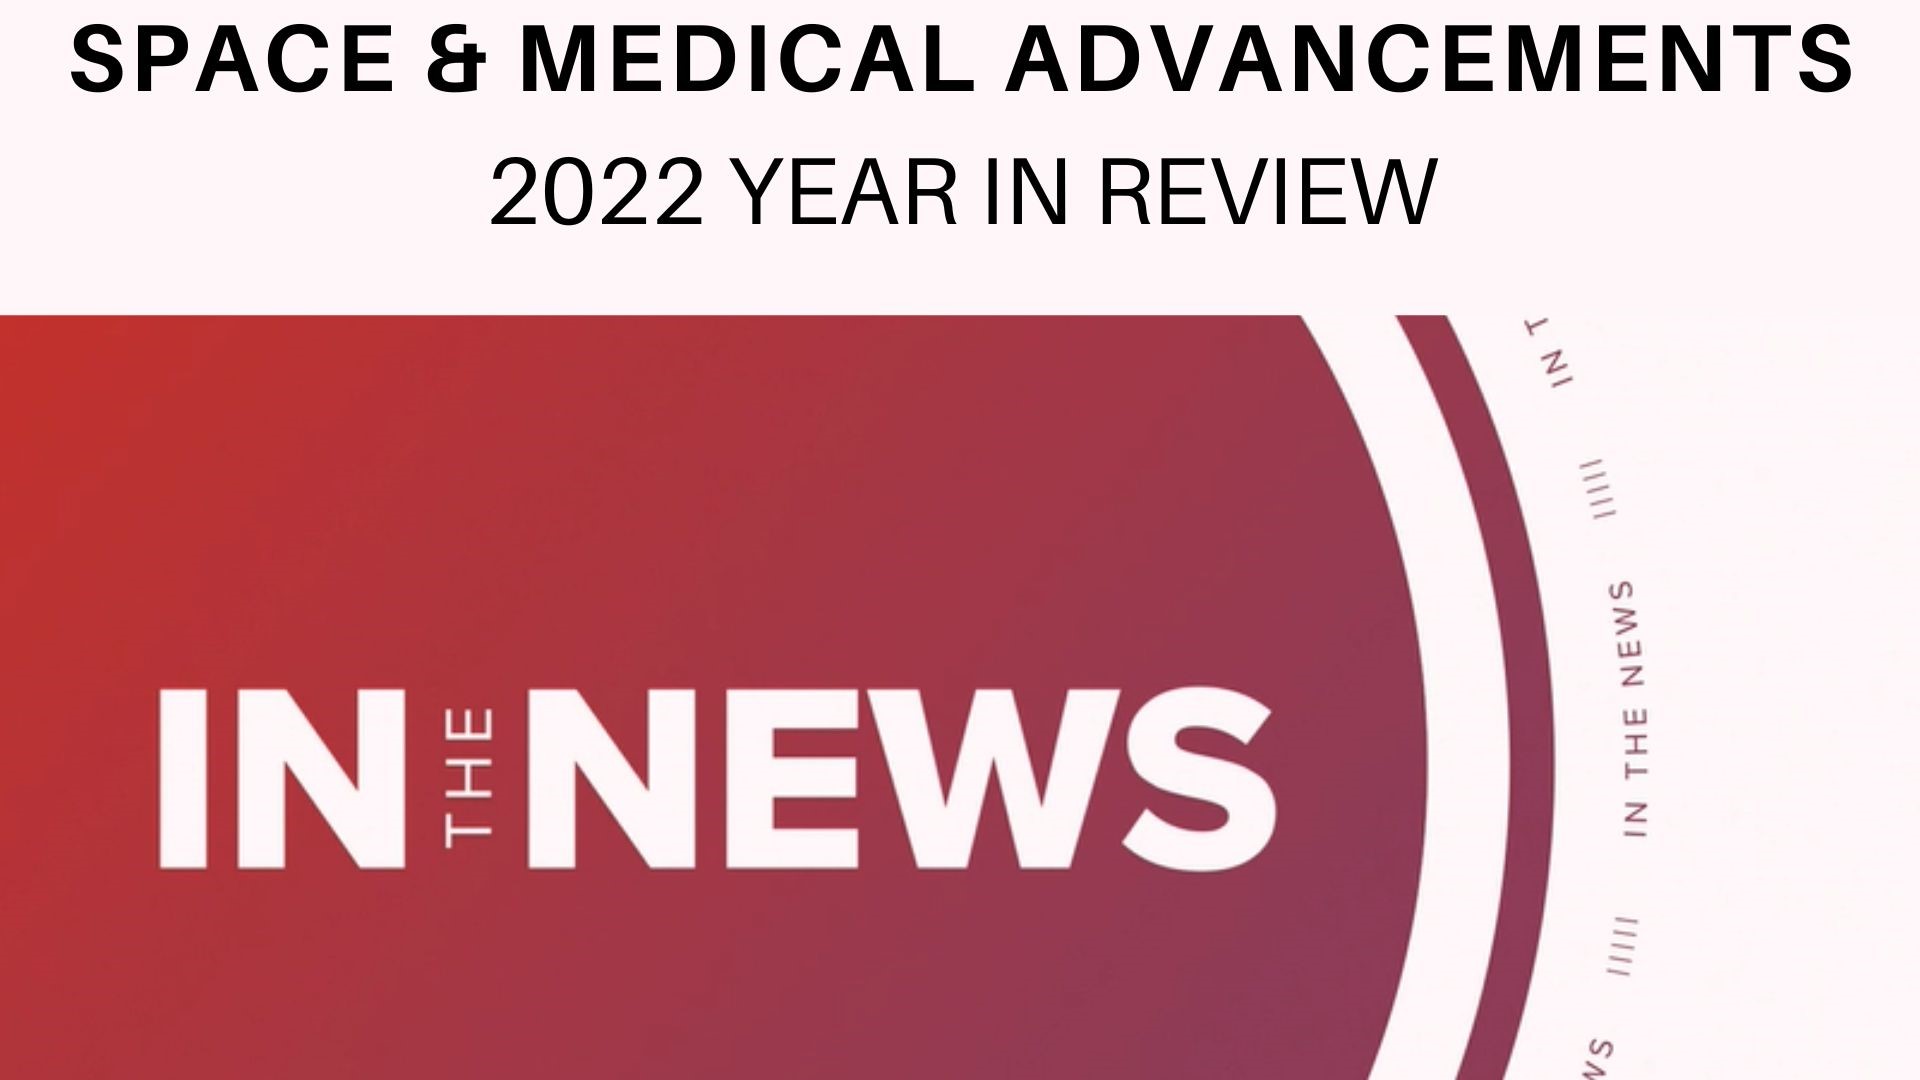 In the News takes a look back at the world of space travel and medical advancements in 2022.